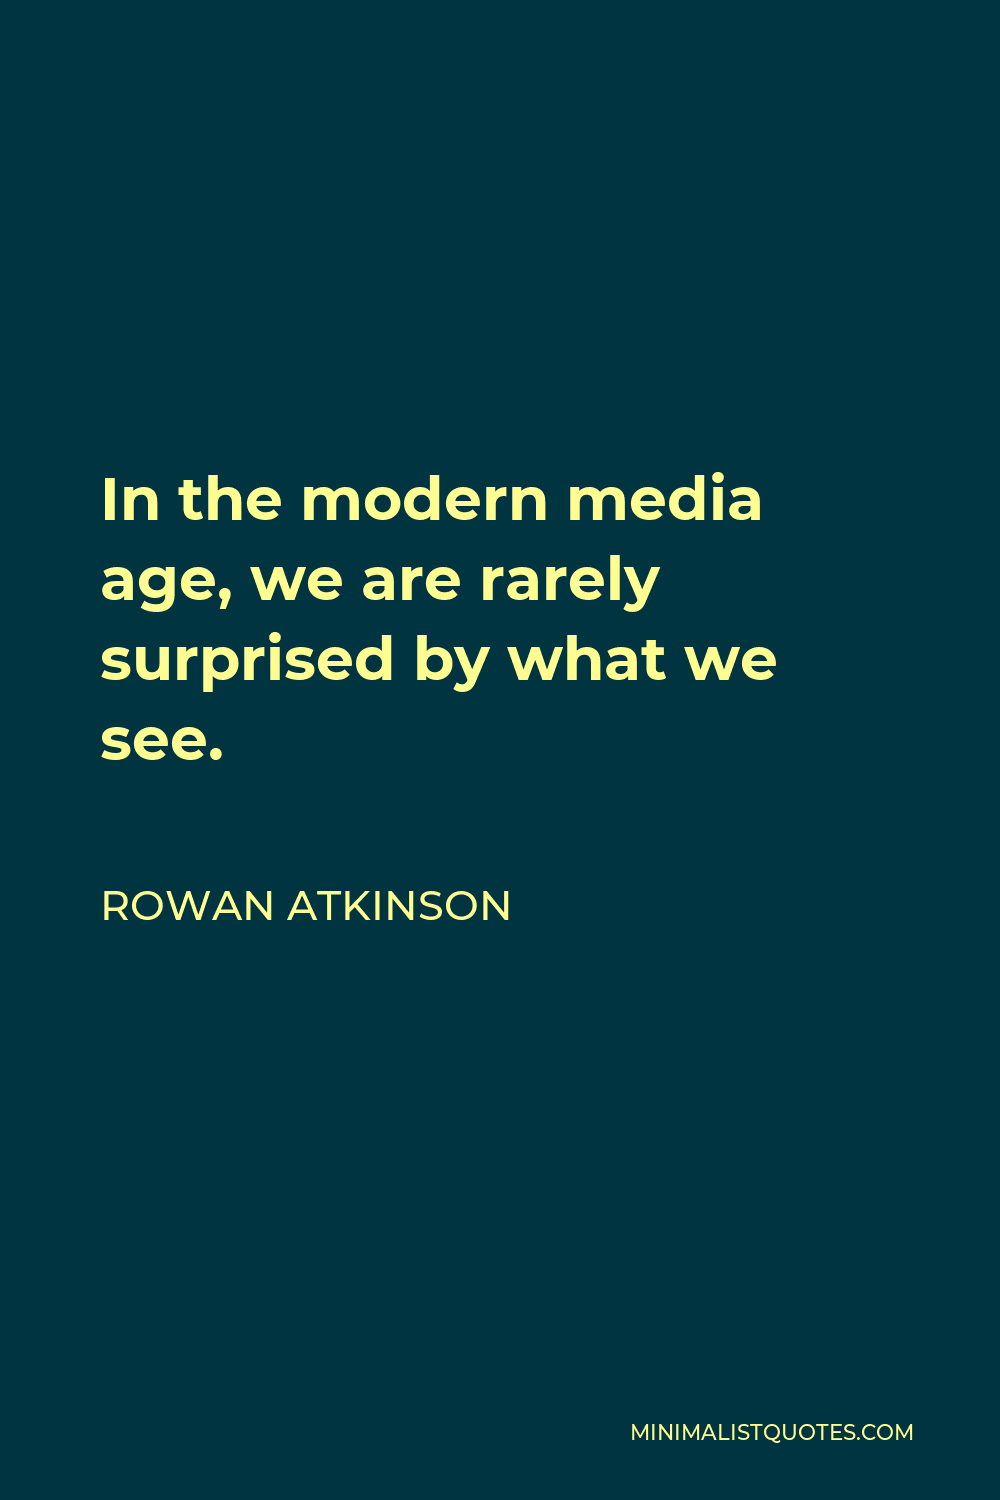 Rowan Atkinson Quote - In the modern media age, we are rarely surprised by what we see.